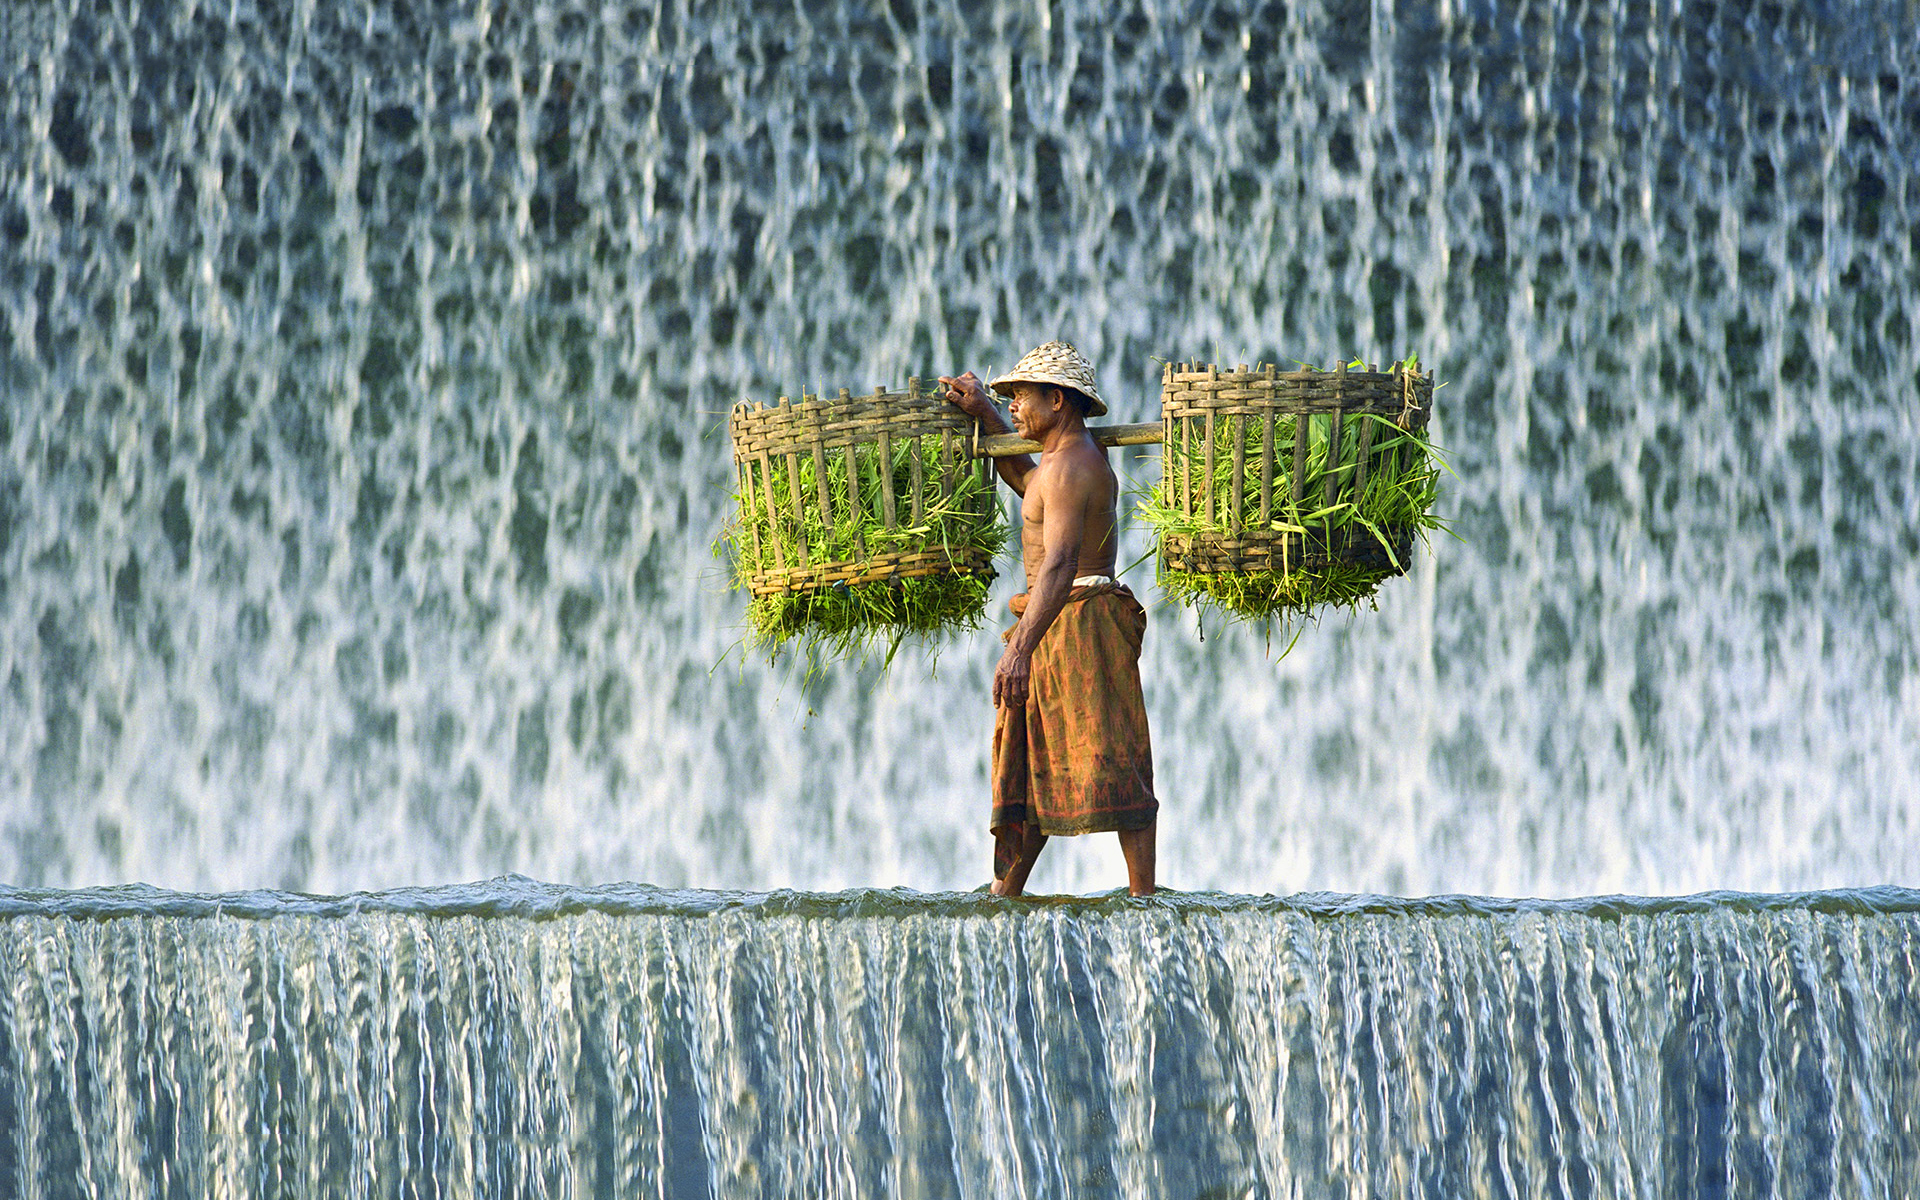 Burden man waterfall Wallpapers Pictures Photos Images. «